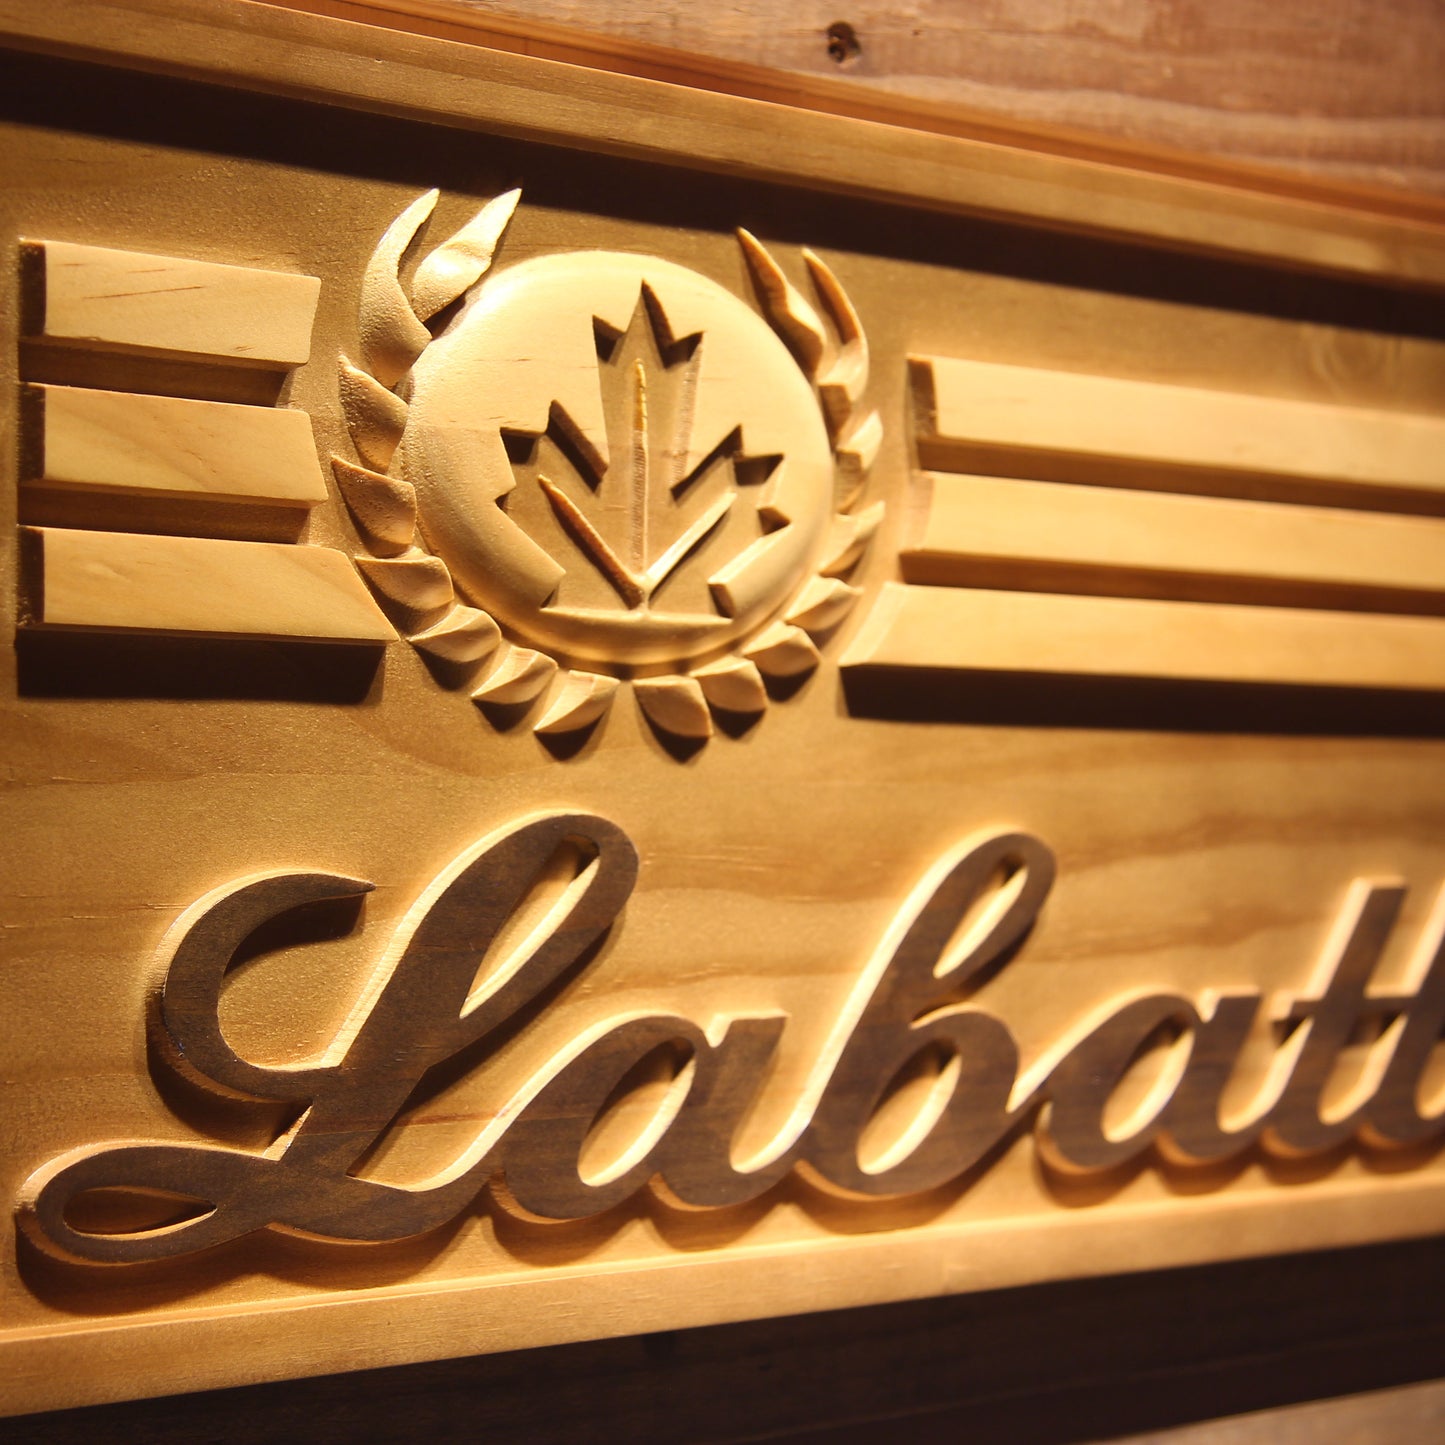 Labatt  3D Wooden Bar Signs by Woody Signs Co. - Handmade Crafted Unique Wooden Creative